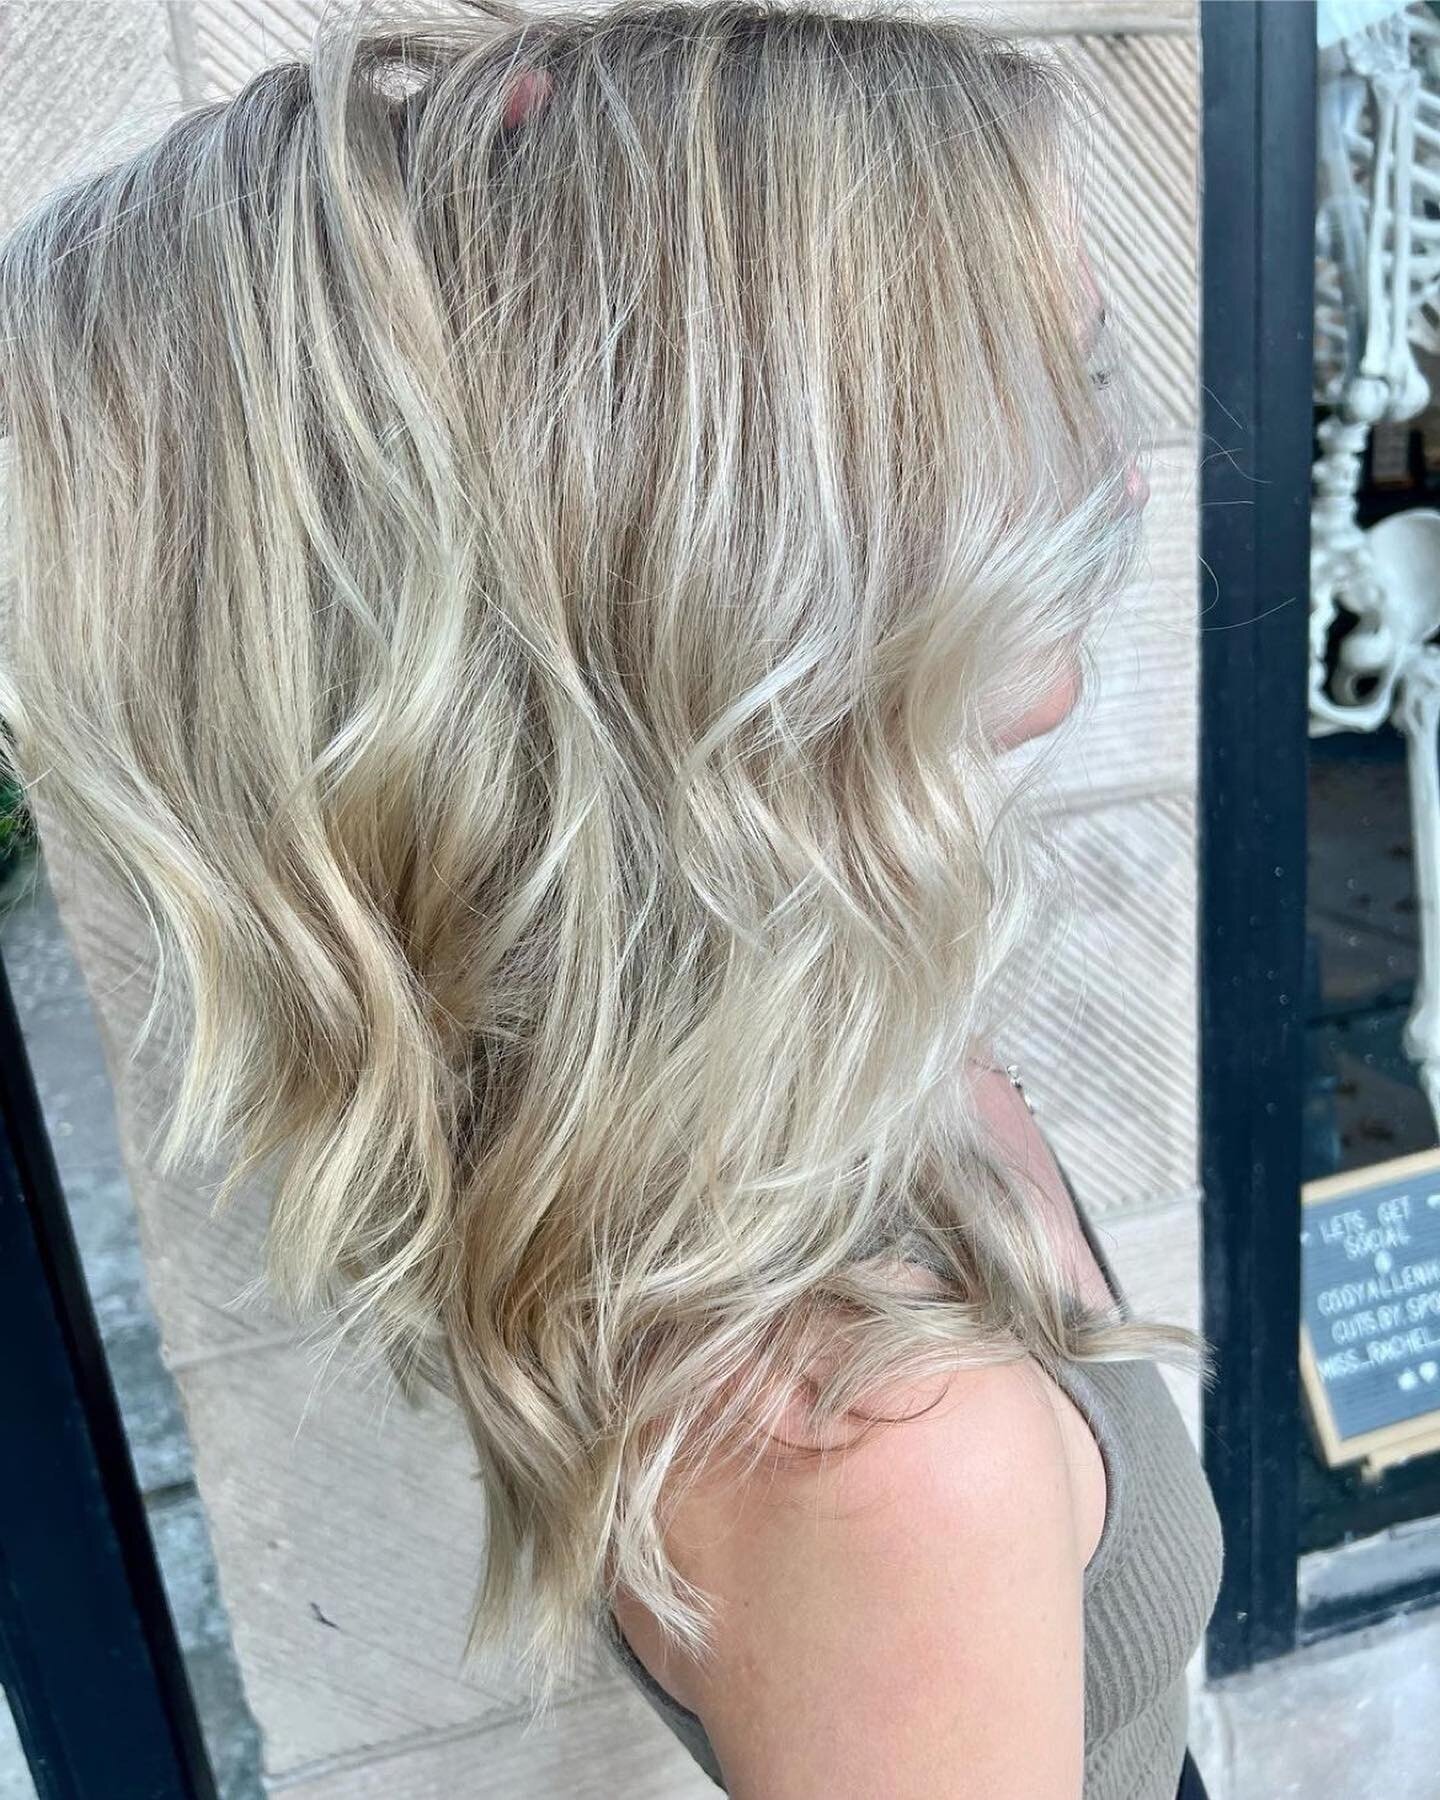 @cuts.by.spooky did this beautiful blonde color! 👏👏
&bull;
&bull;
#rksalonchicago #cutsbyspooky #chicagohairstylist🎀 #chicagohairstylist #chicagohair #chicagohairstylists #chicagohairsalon #balayage #blonde #modernsalon #behindthechair #redken